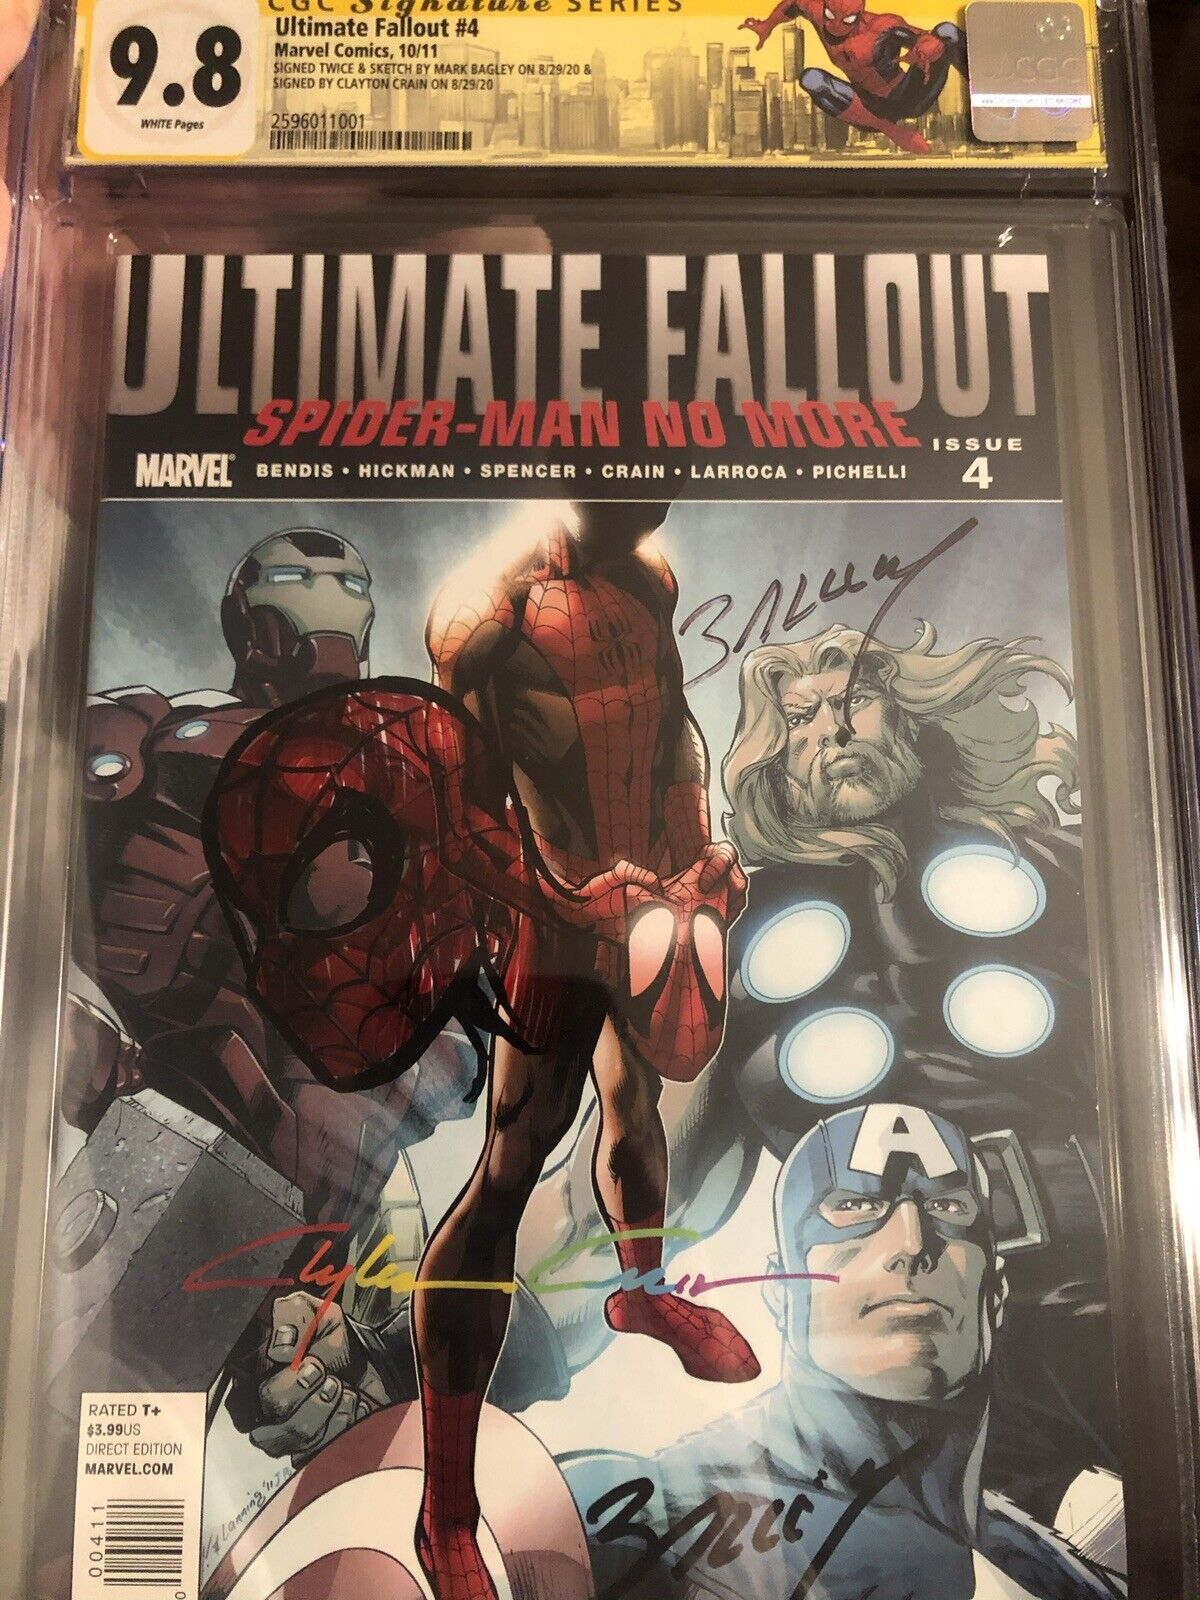 ultimate fallout 4 cgc 9.8 SS X 3 Plus Bagley Spiderman Head Sketch&Crainbow